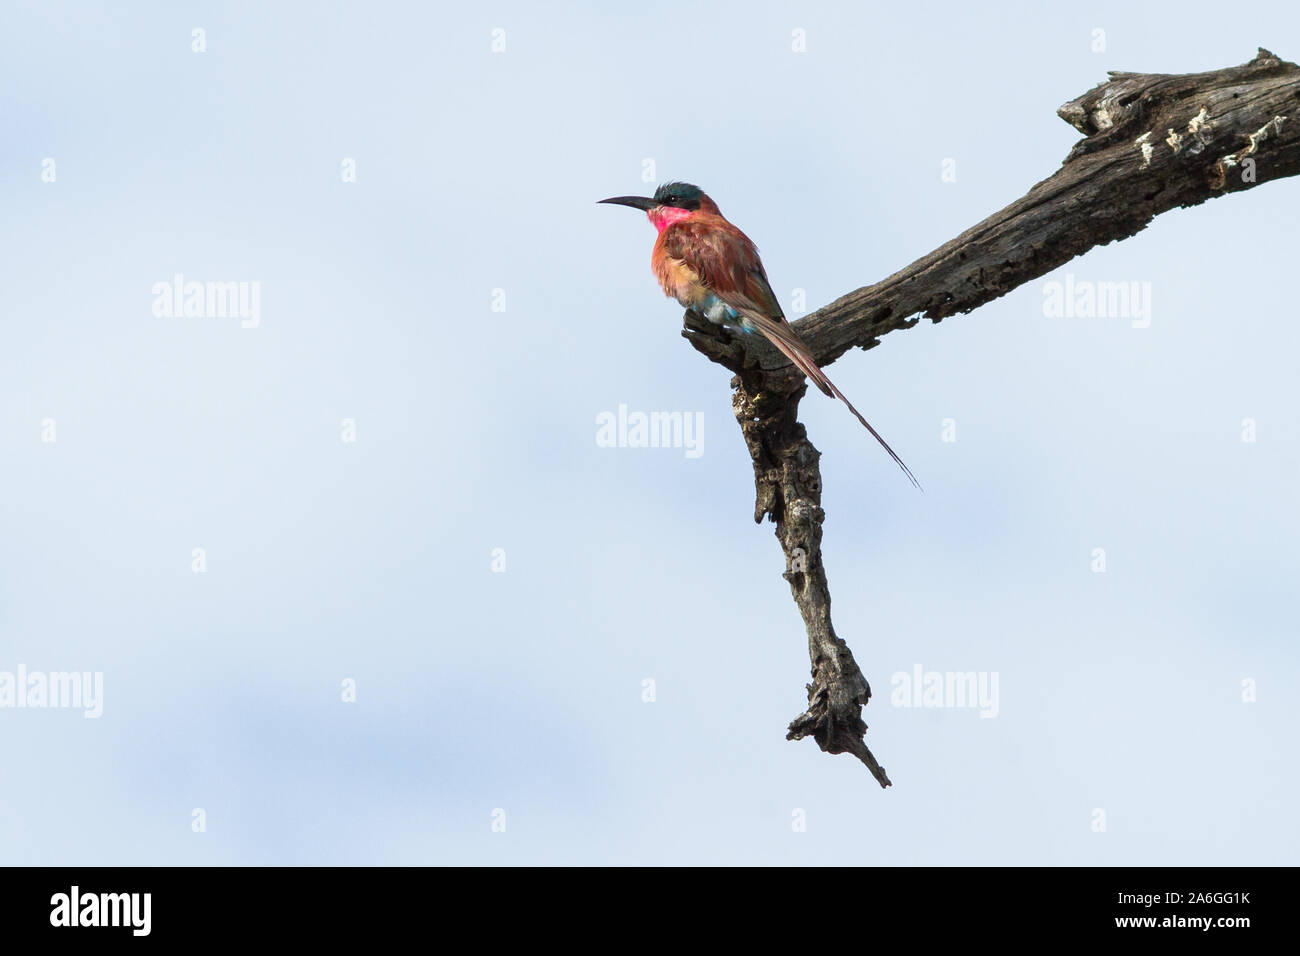 A Southern Carmine Bee-Eater waits on its perch in Kruger National Park, South Africa. Stock Photo